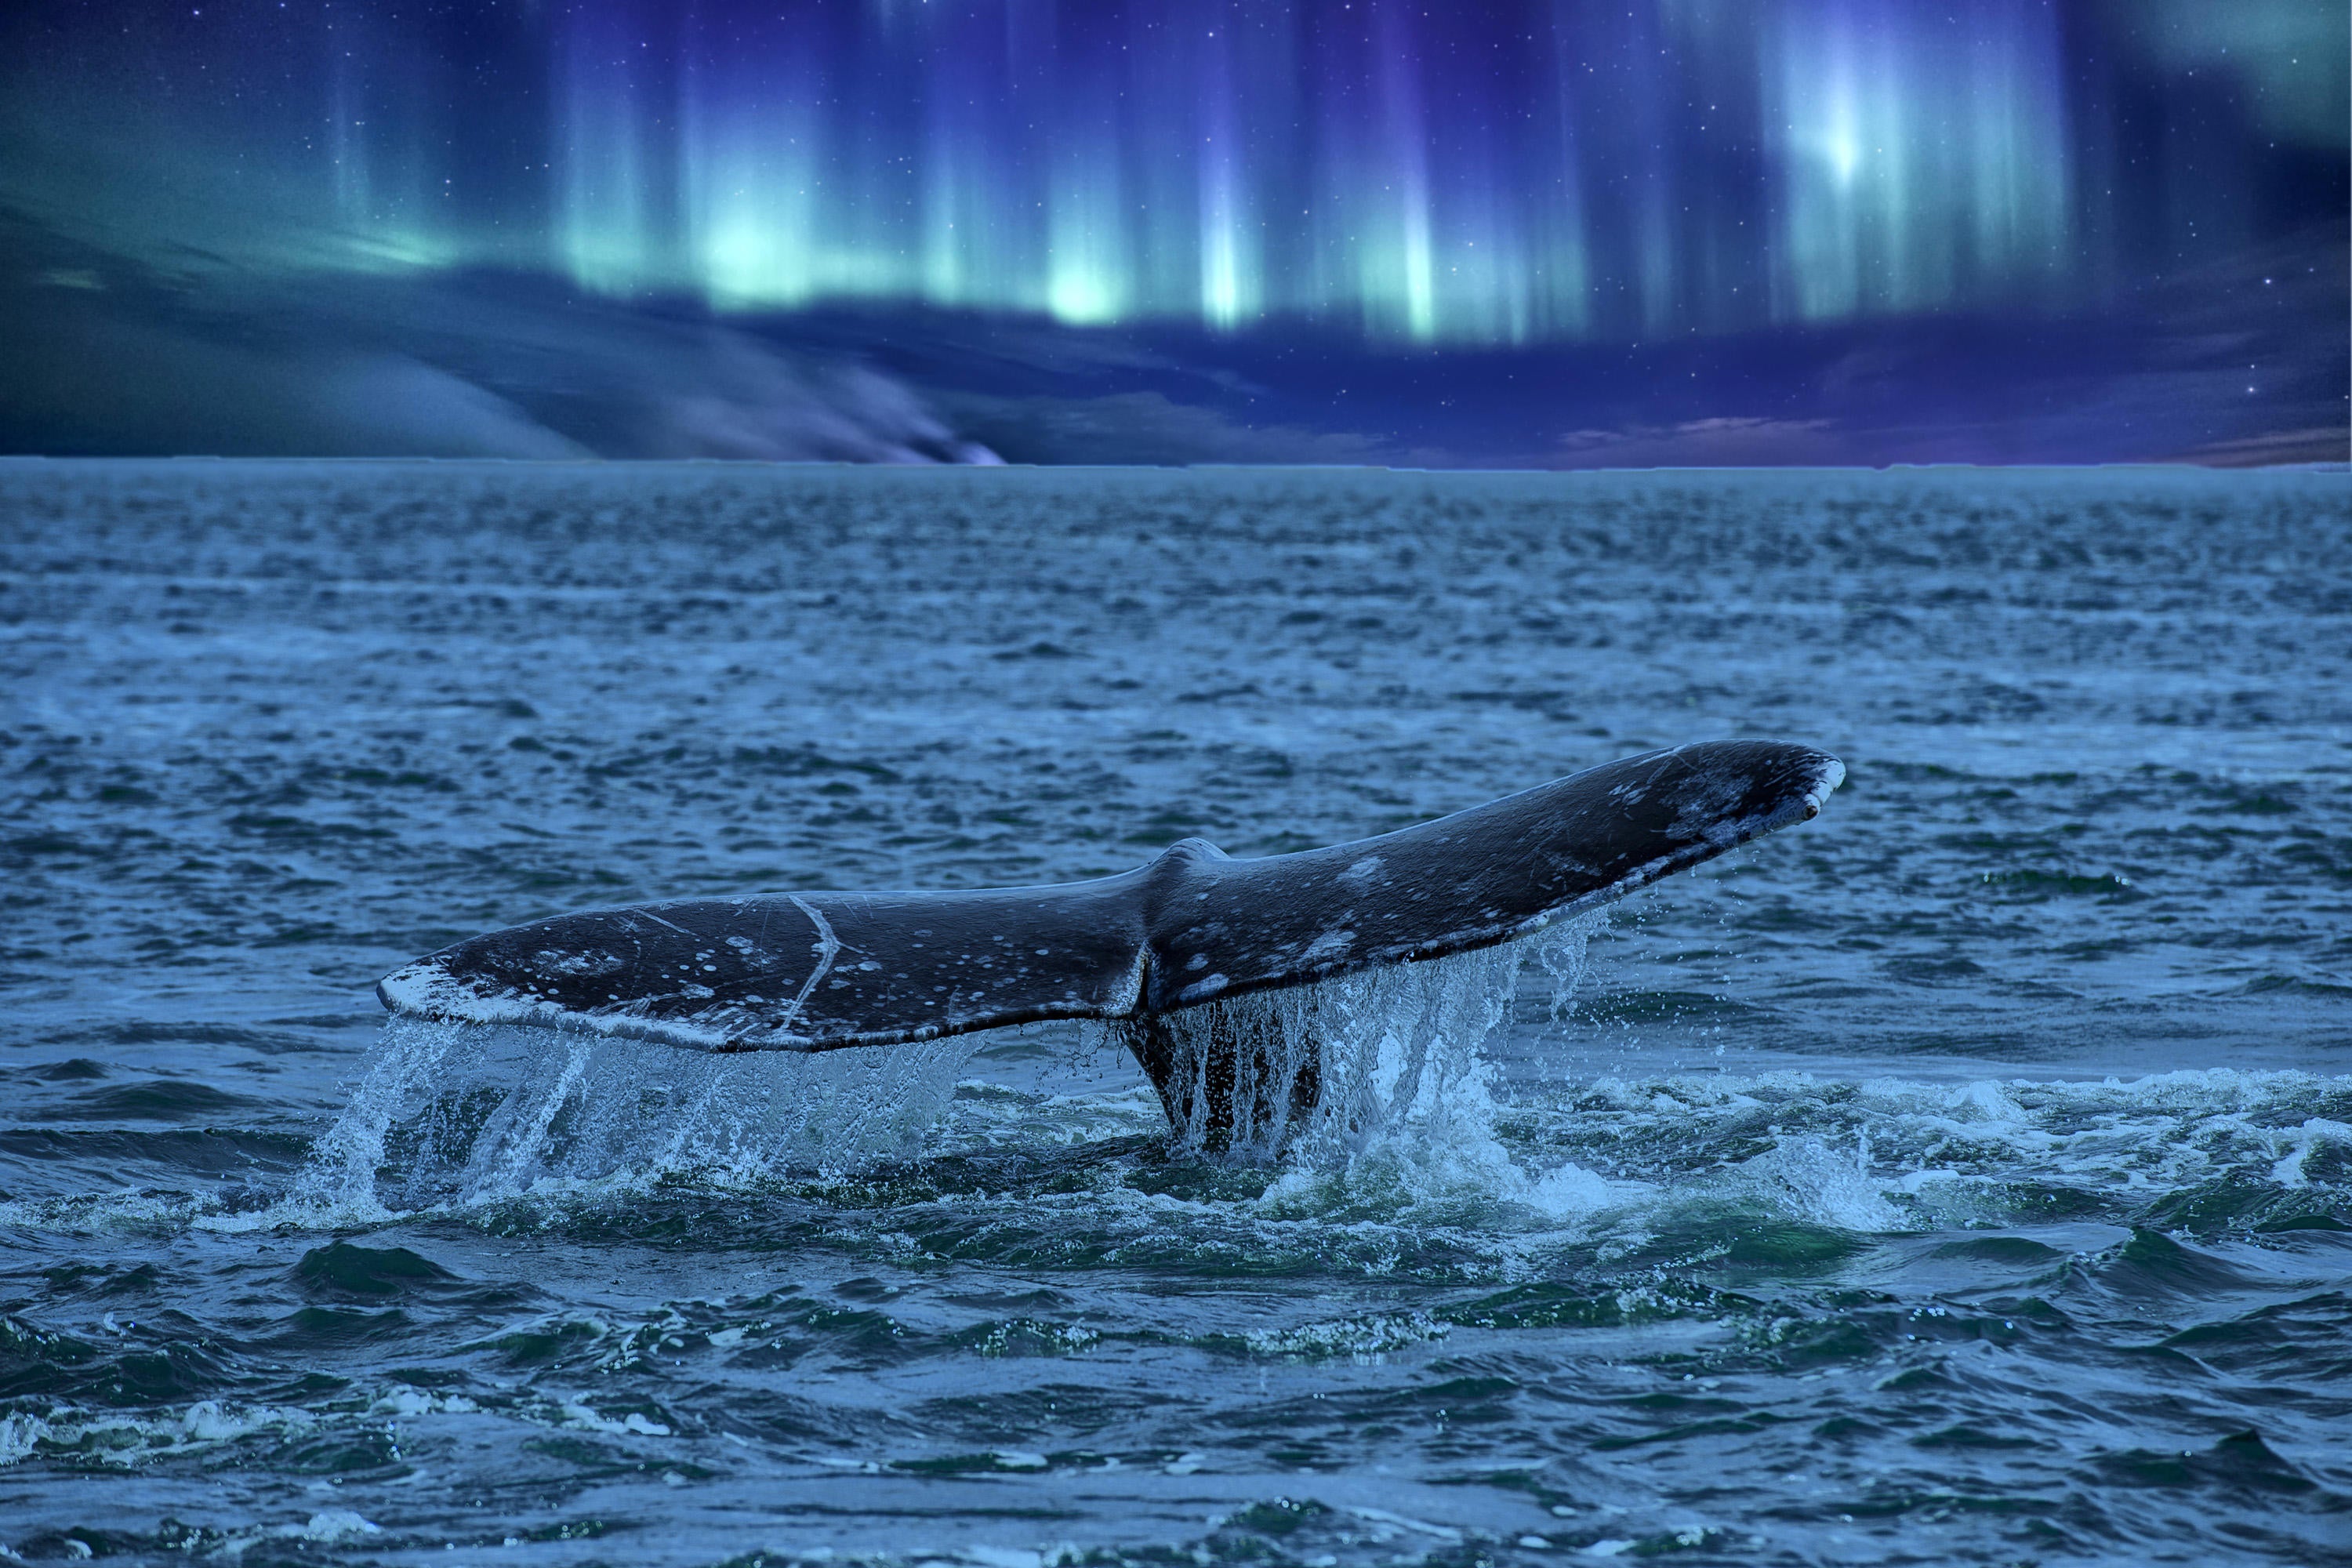 Whale tail with Northern lights in background